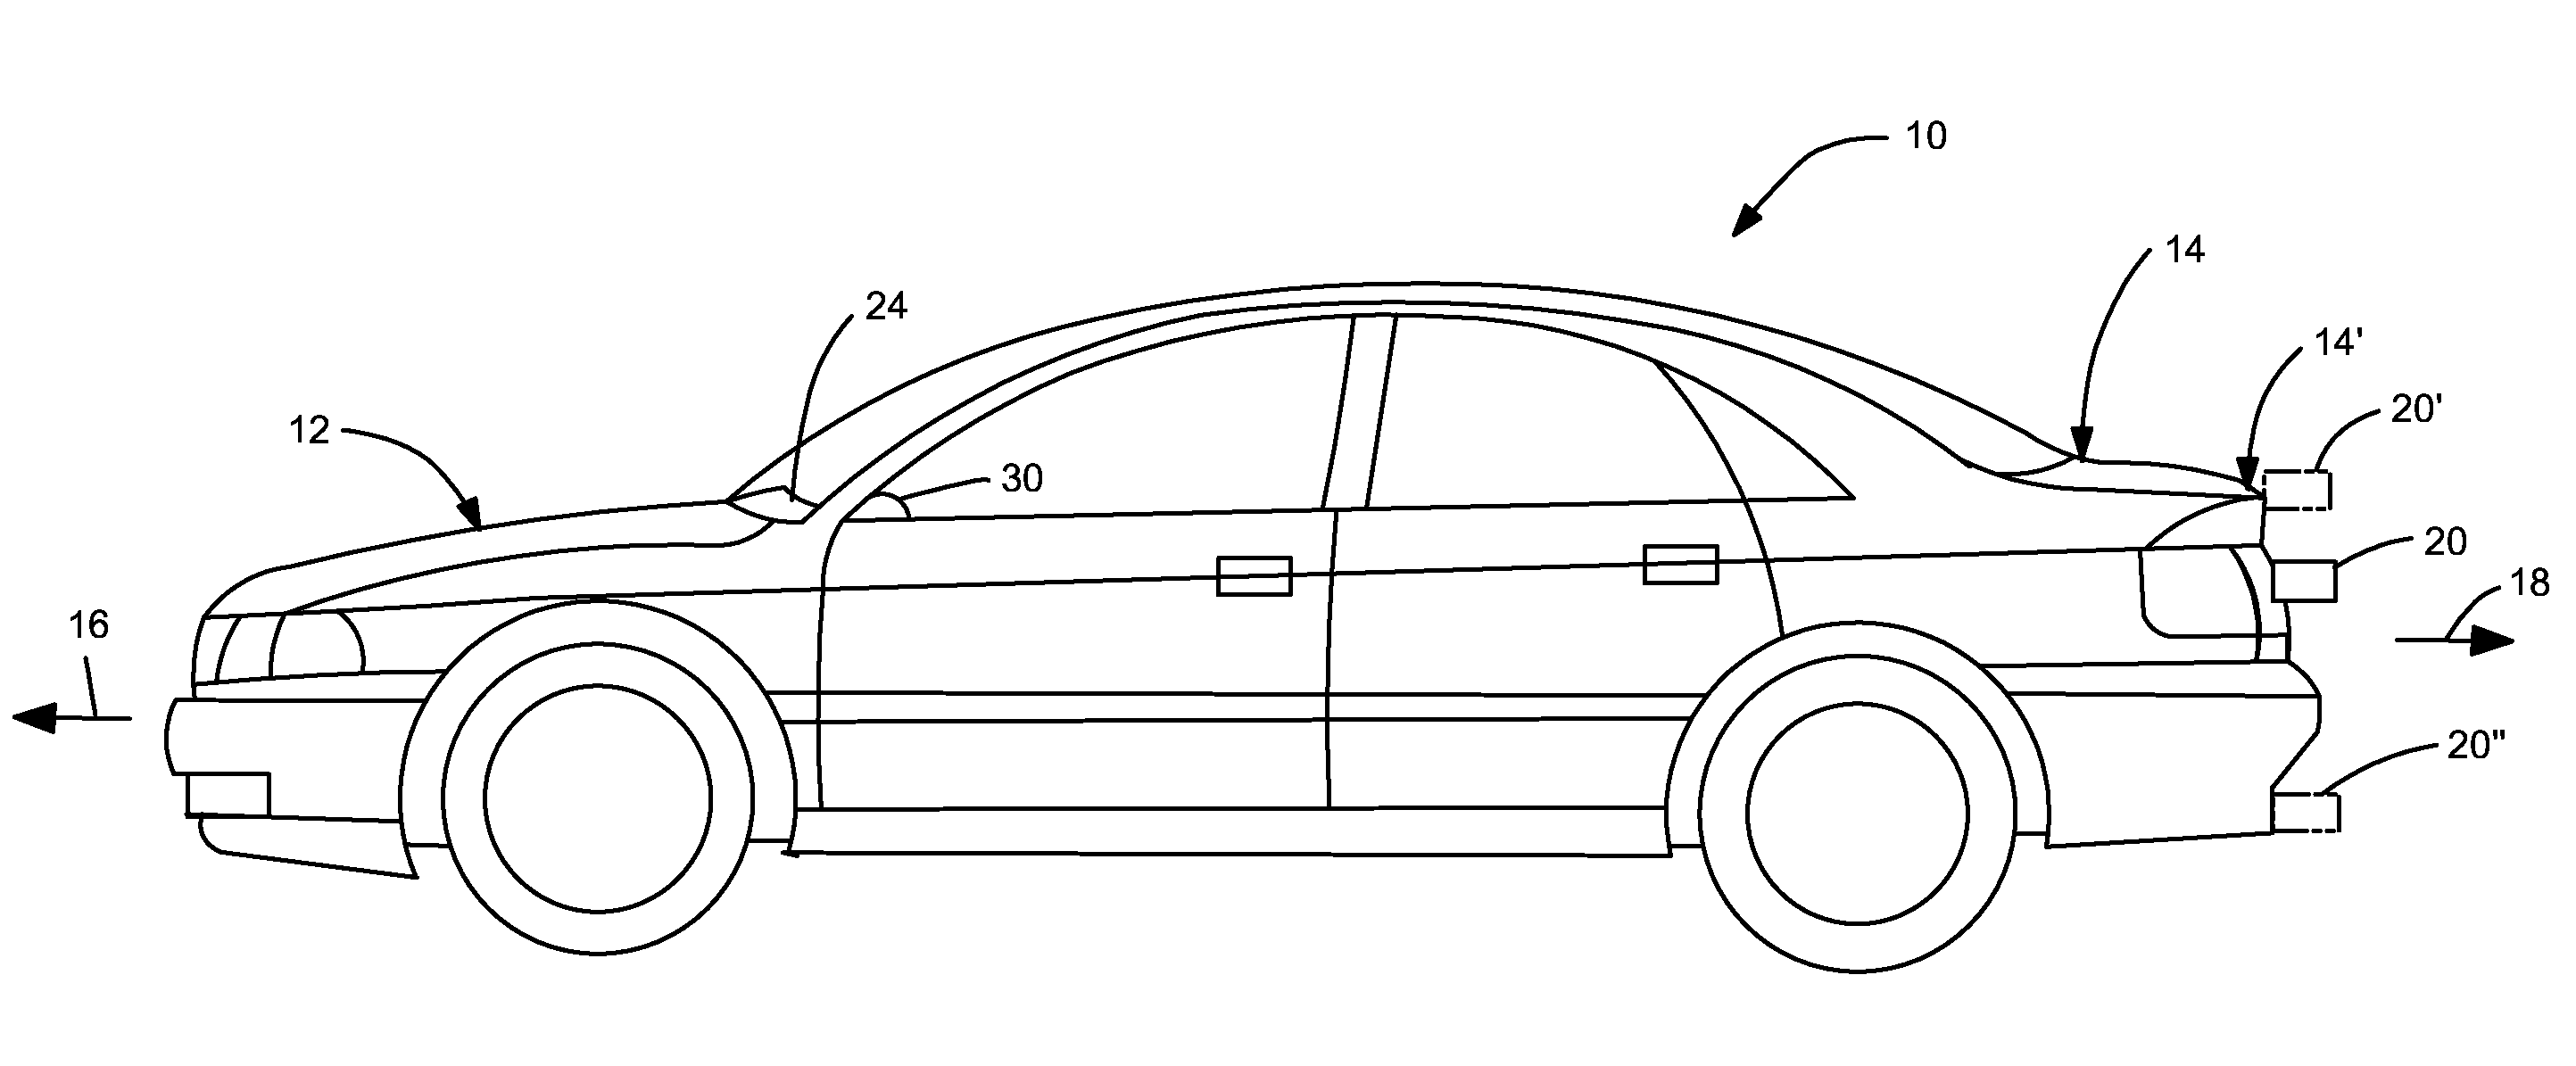 Combined backup camera and driver alertness system for a vehicle